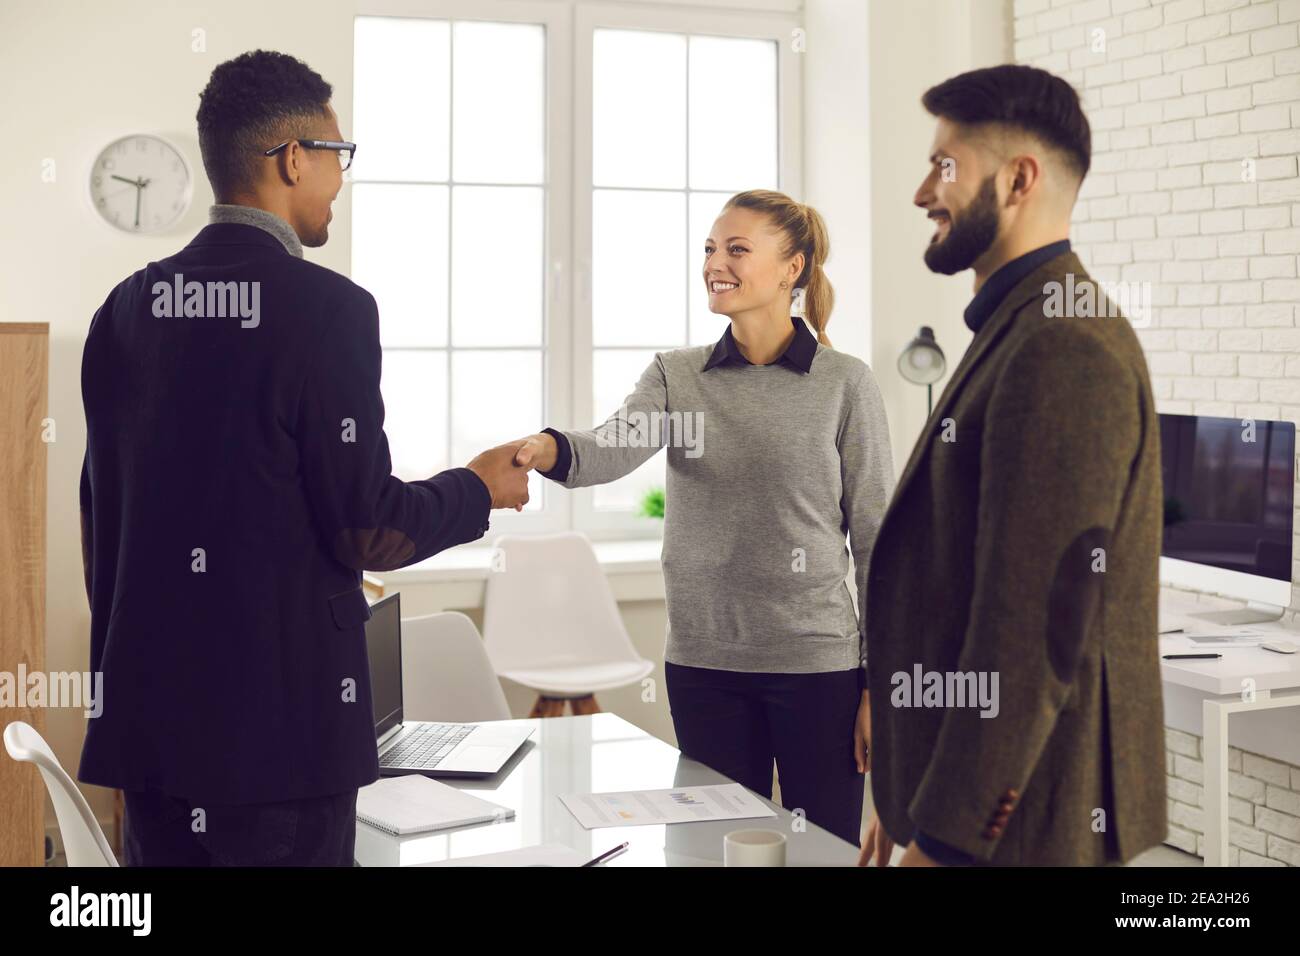 Woman shaking hands with advisor or job candidate after successful meeting or interview Stock Photo